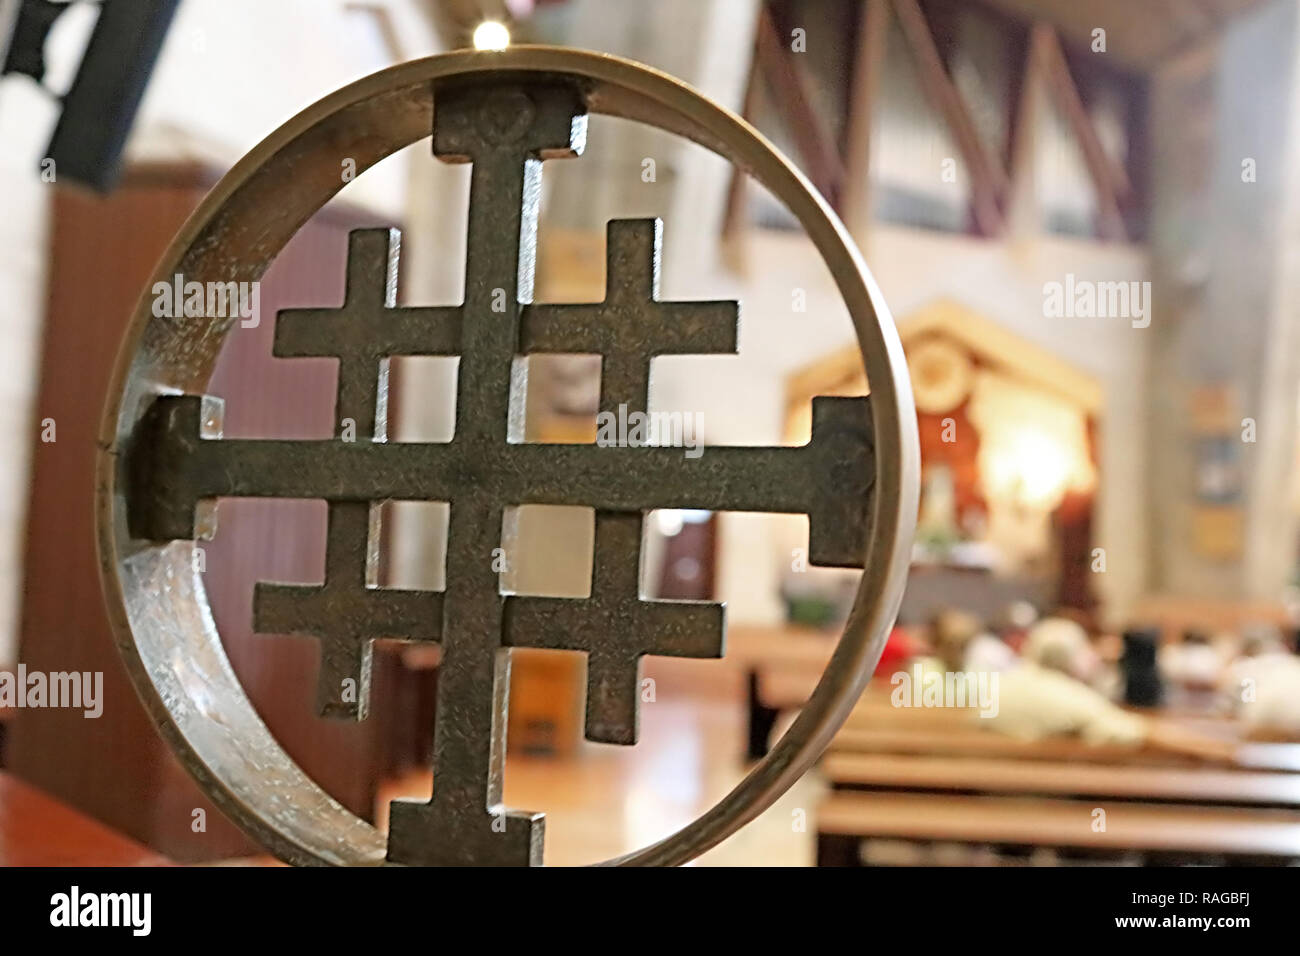 NAZARETH, ISRAEL - SEPTEMBER 21, 2017: Cross in the Basilica of the Annunciation Stock Photo